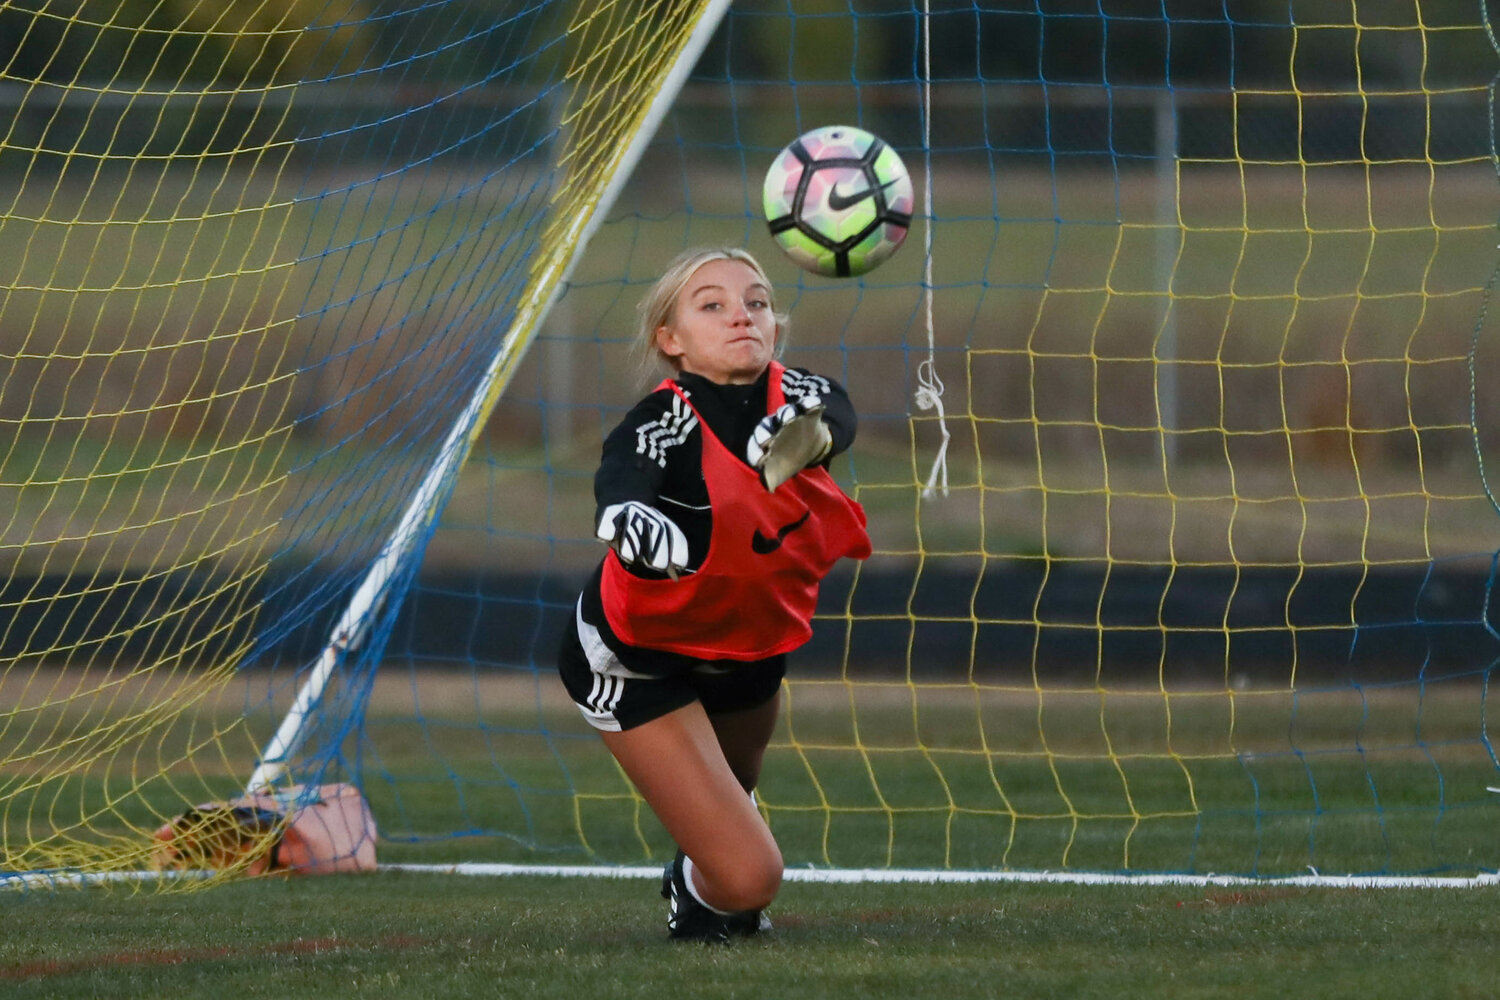 Taylen Evander dives to save Lydia Tobin's penalty kick in the 55th minute of Napavine's 1-1 draw with Adna on Sept. 20.